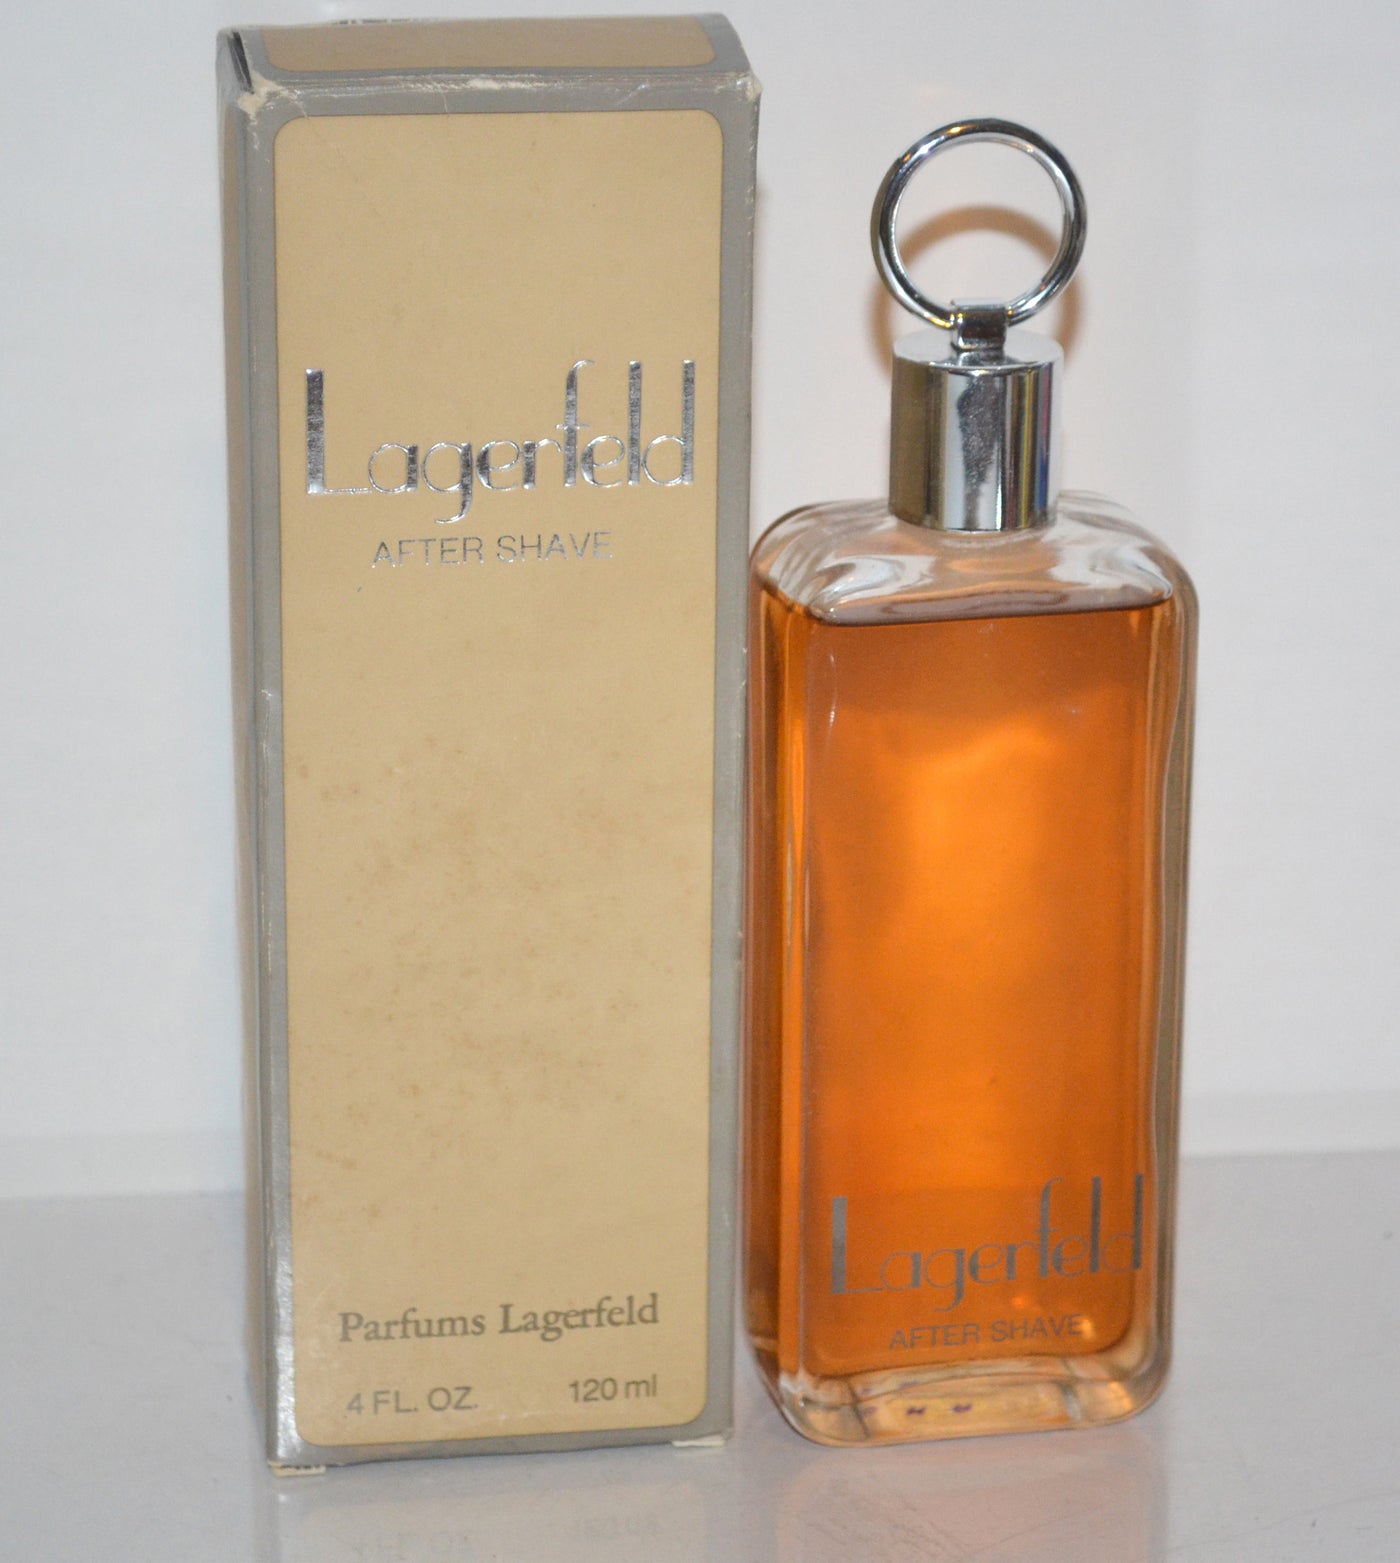 Lagerfeld Classic After Shave – Quirky Finds